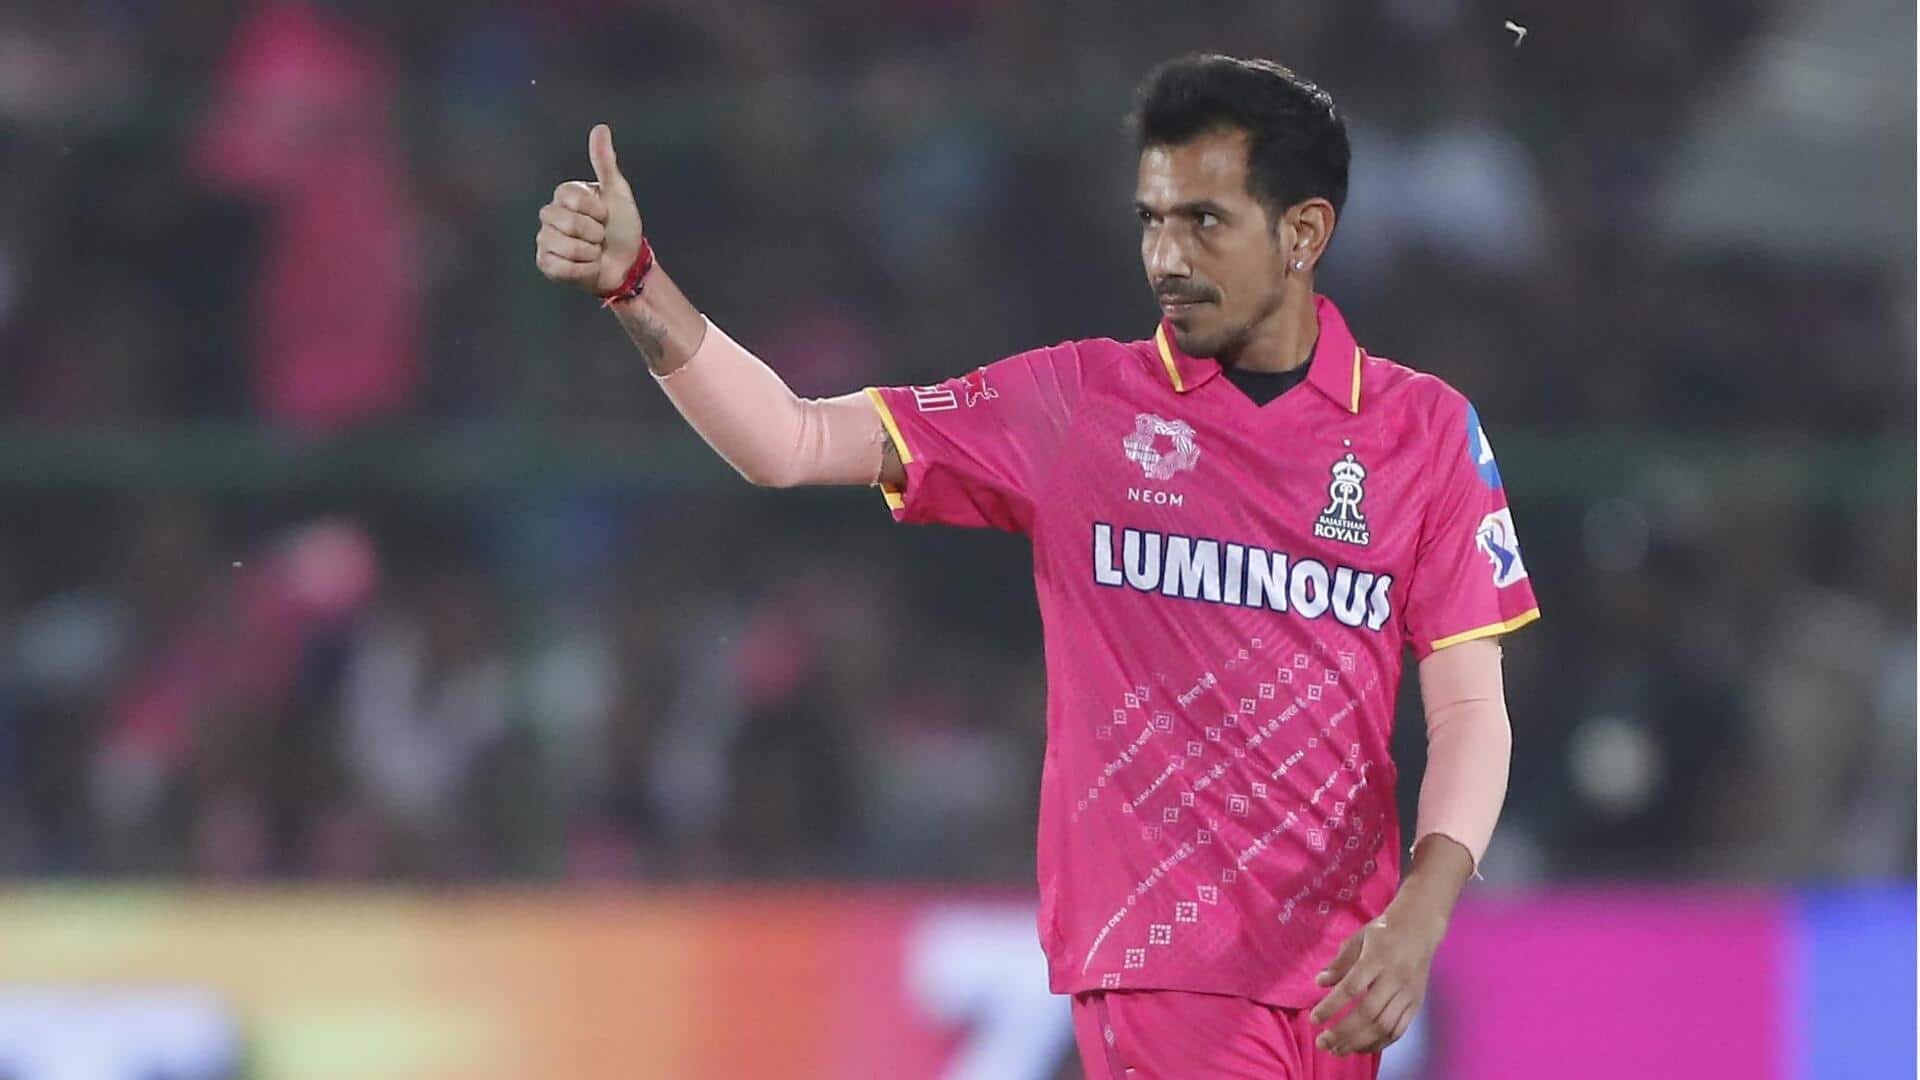 These batters have been Yuzvendra Chahal's bunny in IPL